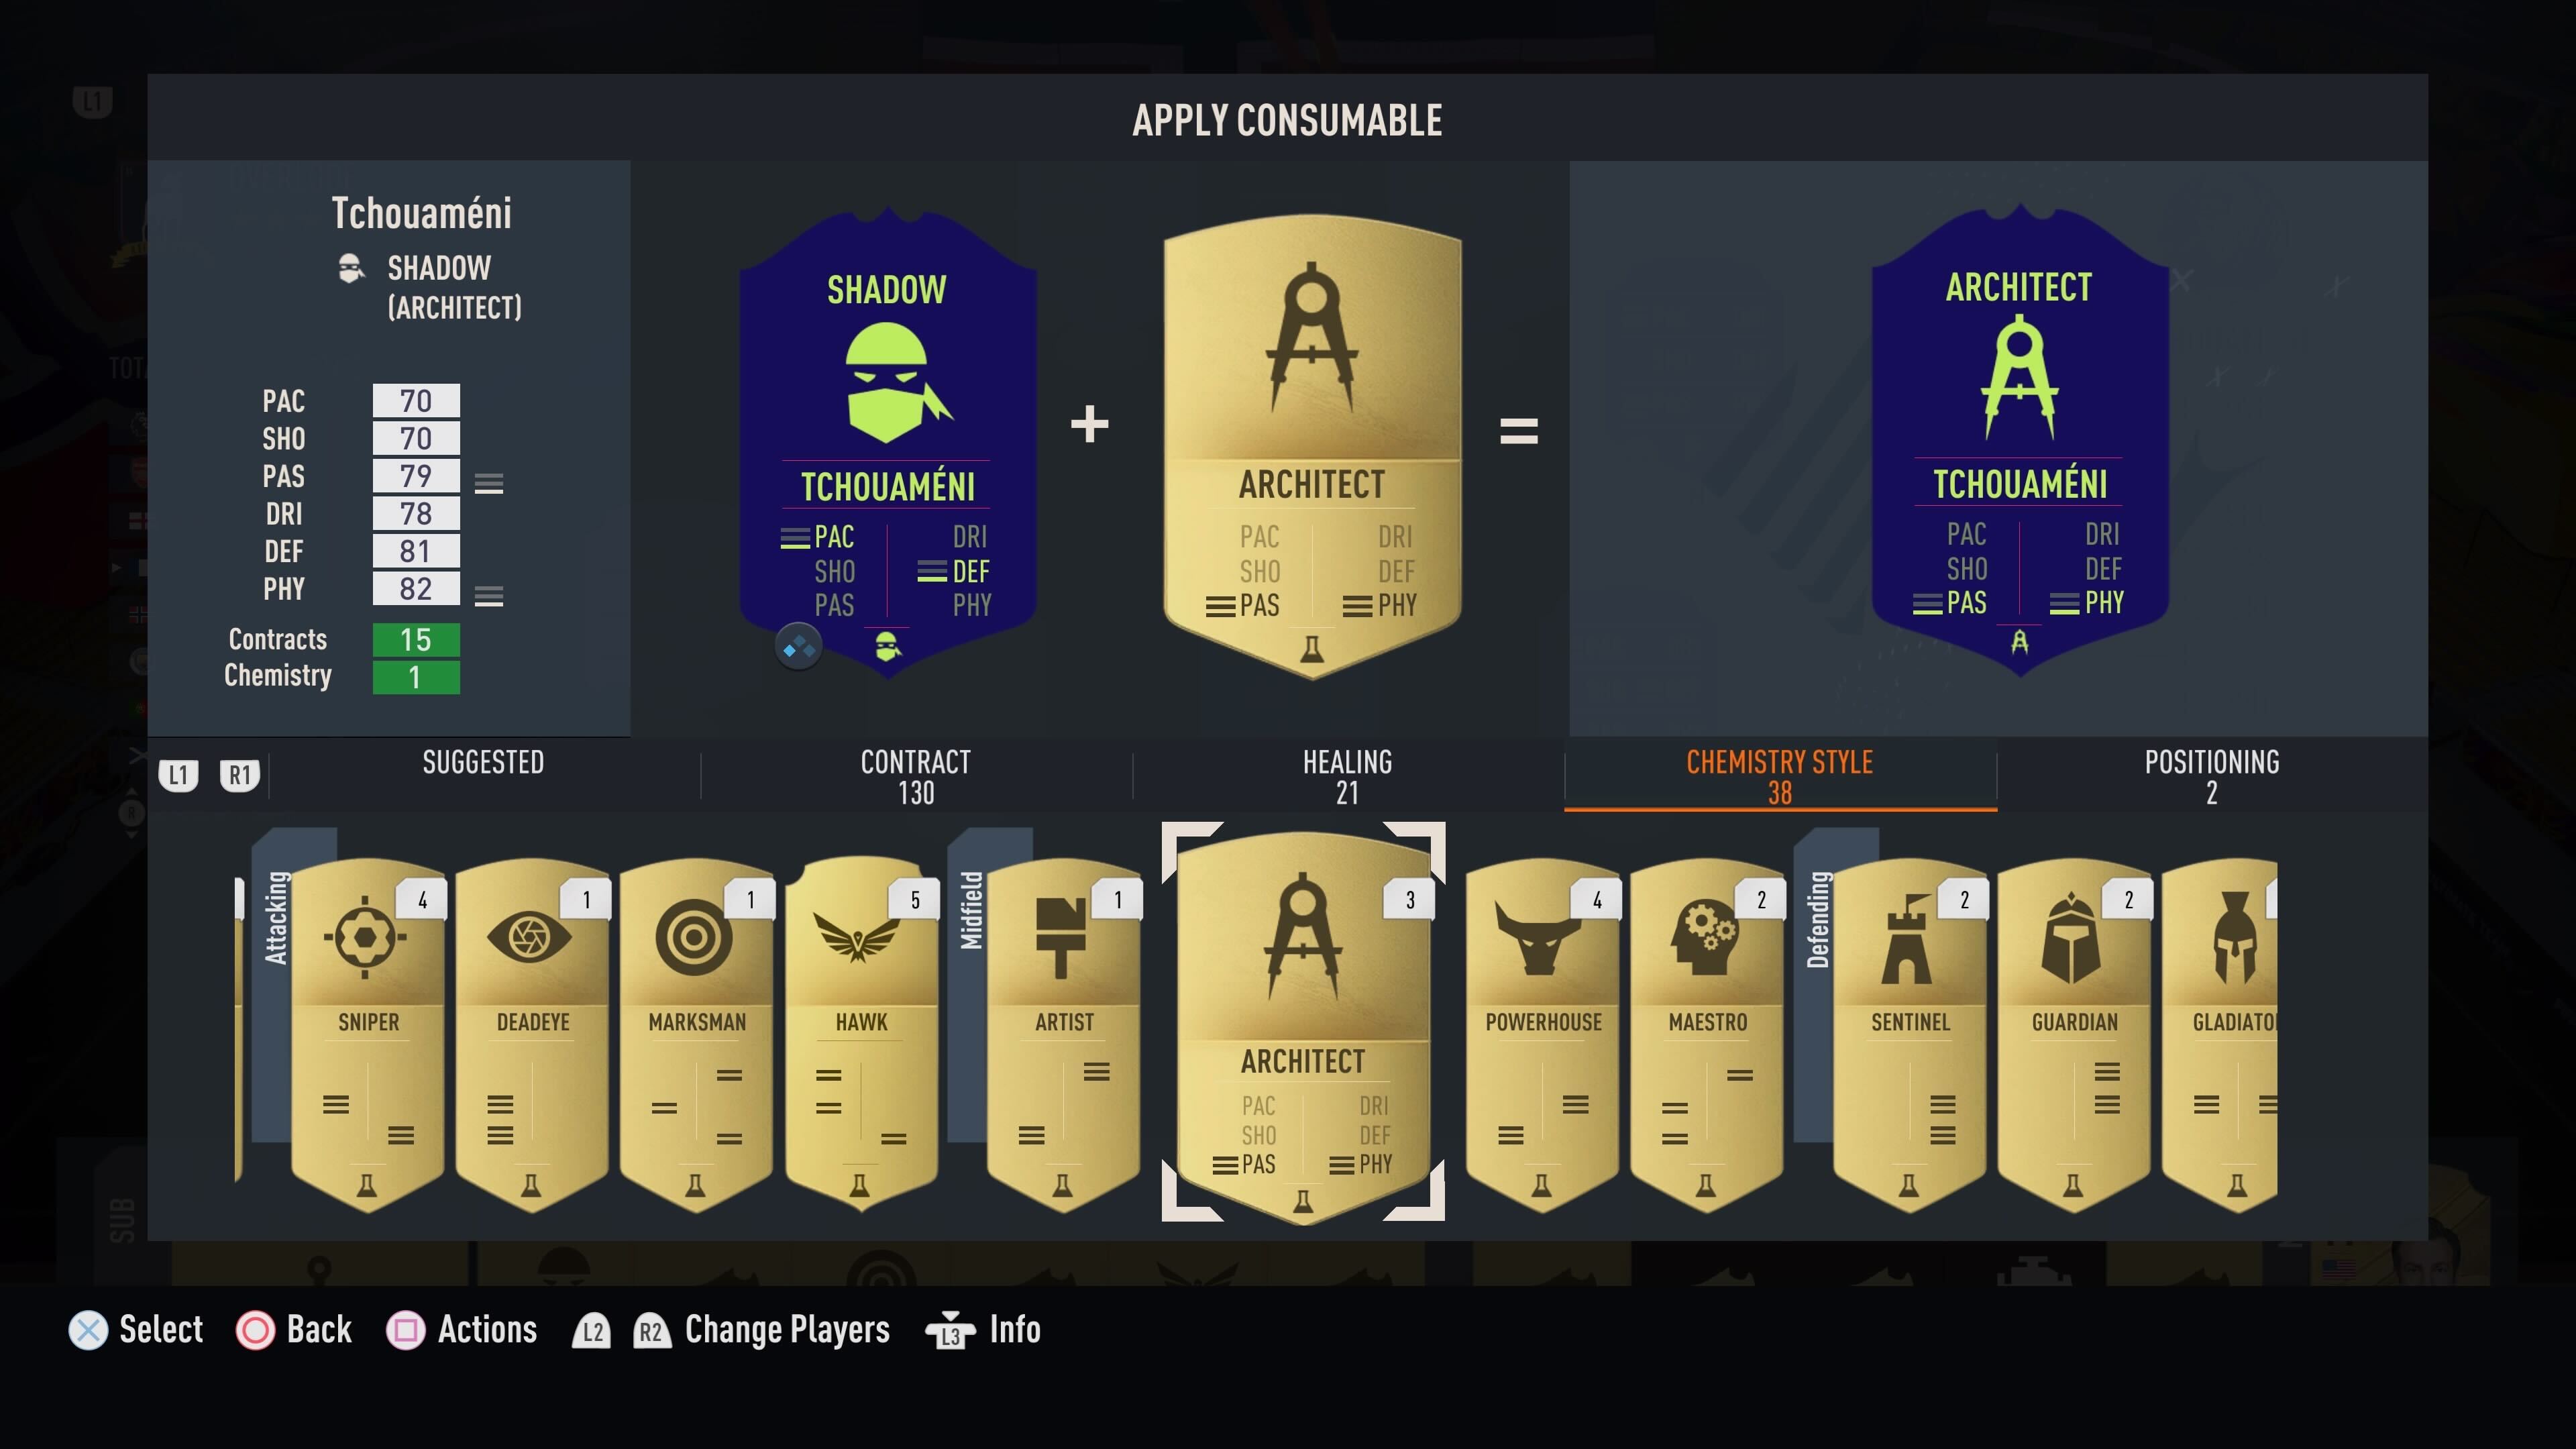 Best Cheap Players To Try In FIFA 23 Ultimate Team